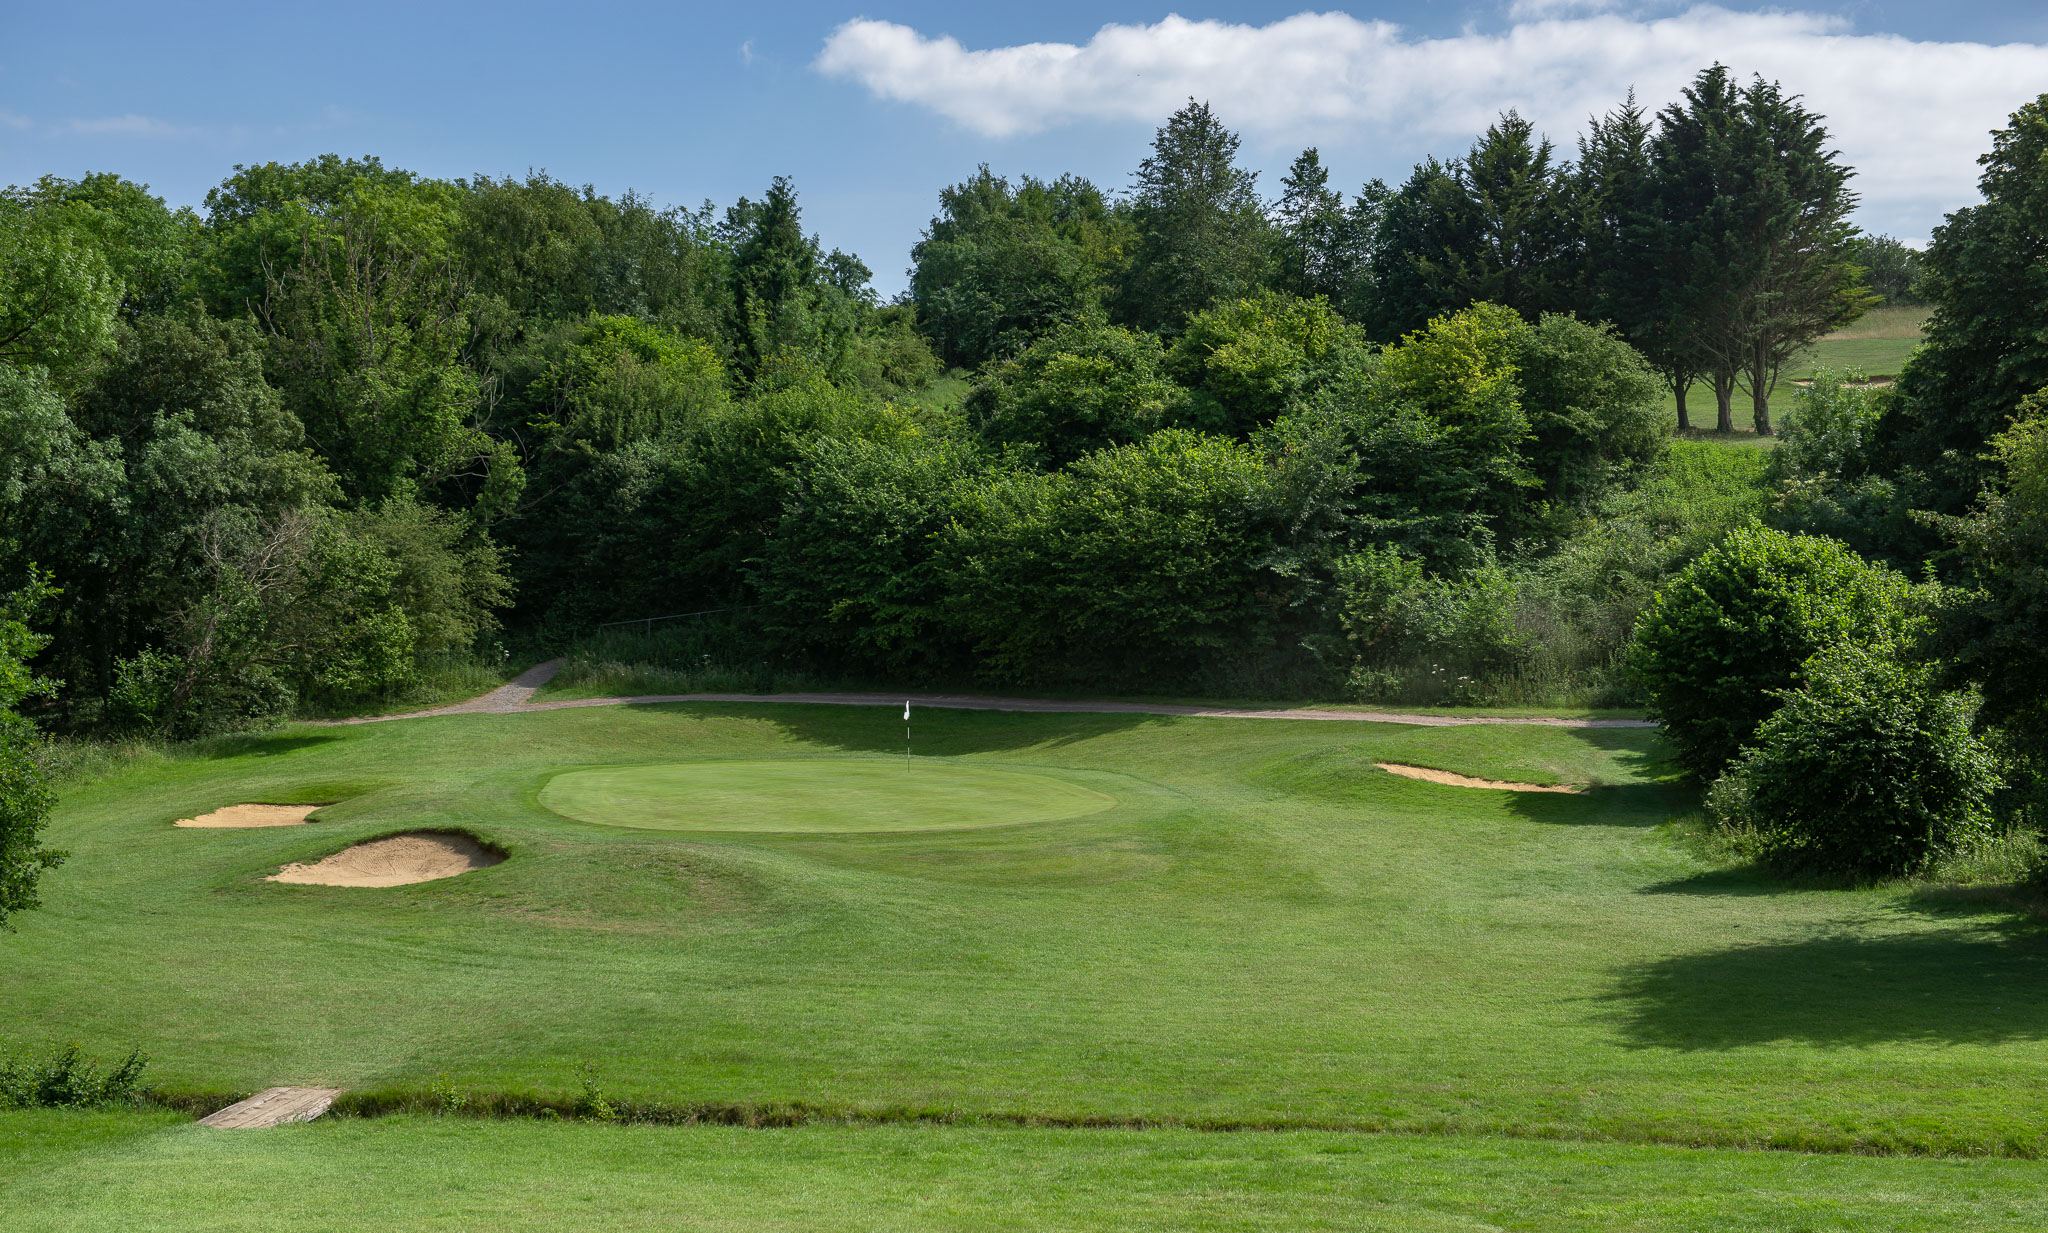 Course update from Portsmouth Golf Course